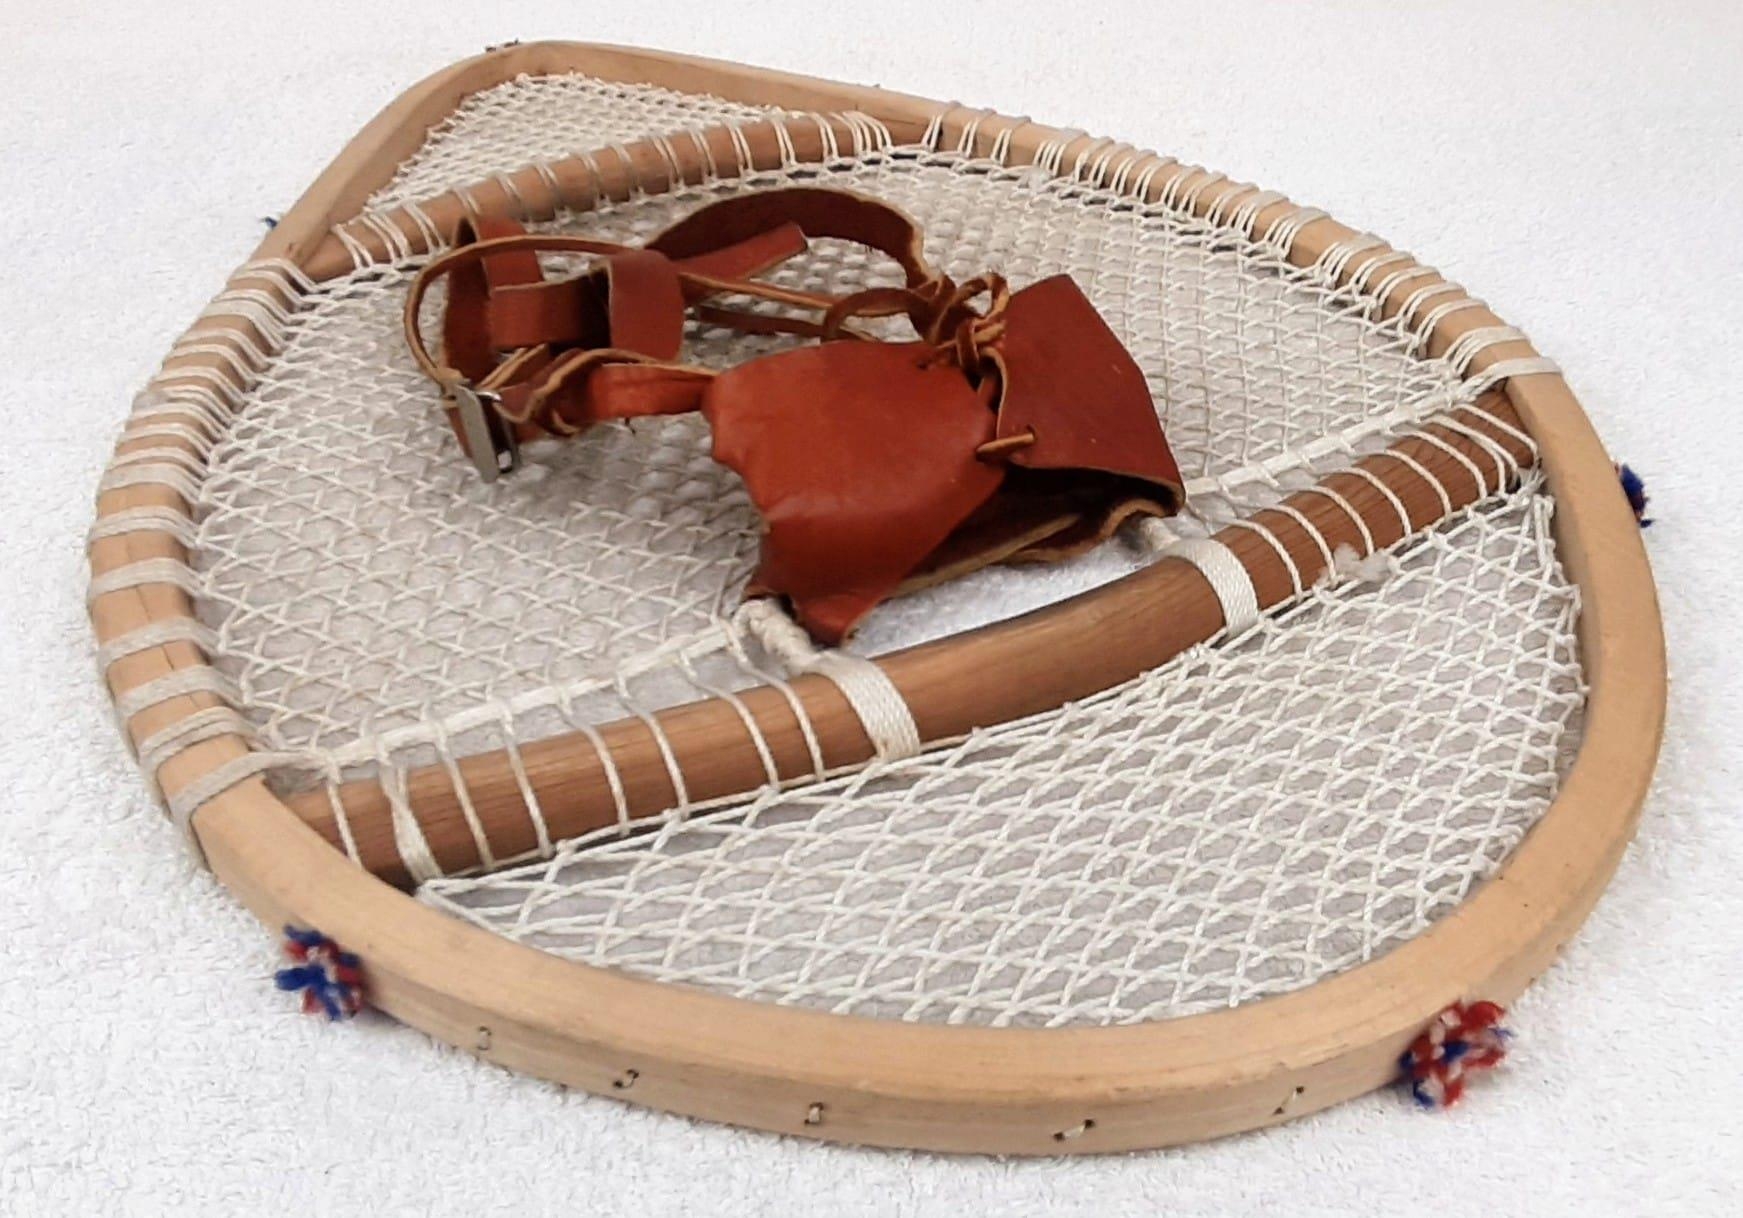 A Pair of Vintage Hand-Crafted Innuit Snowshoes from Newfoundland and Labrador. 58 x 40cm. - Image 5 of 6